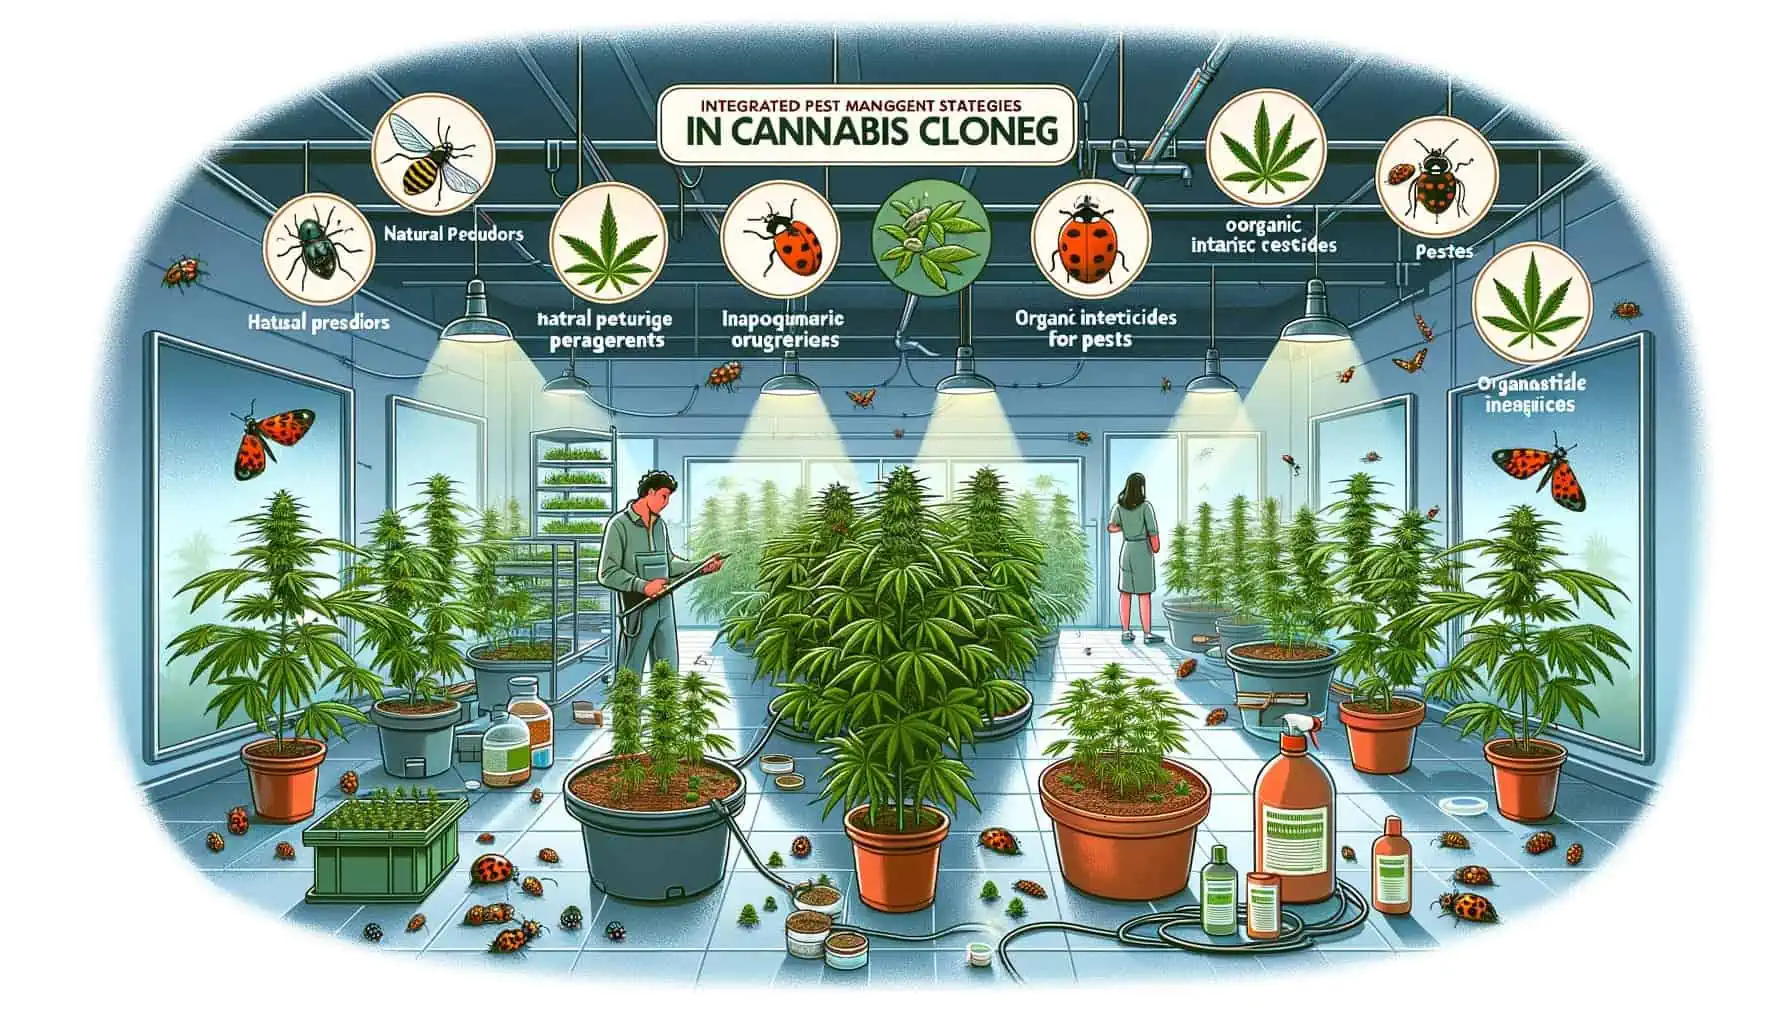 Integrated Pest Management in Cloning Cannabis